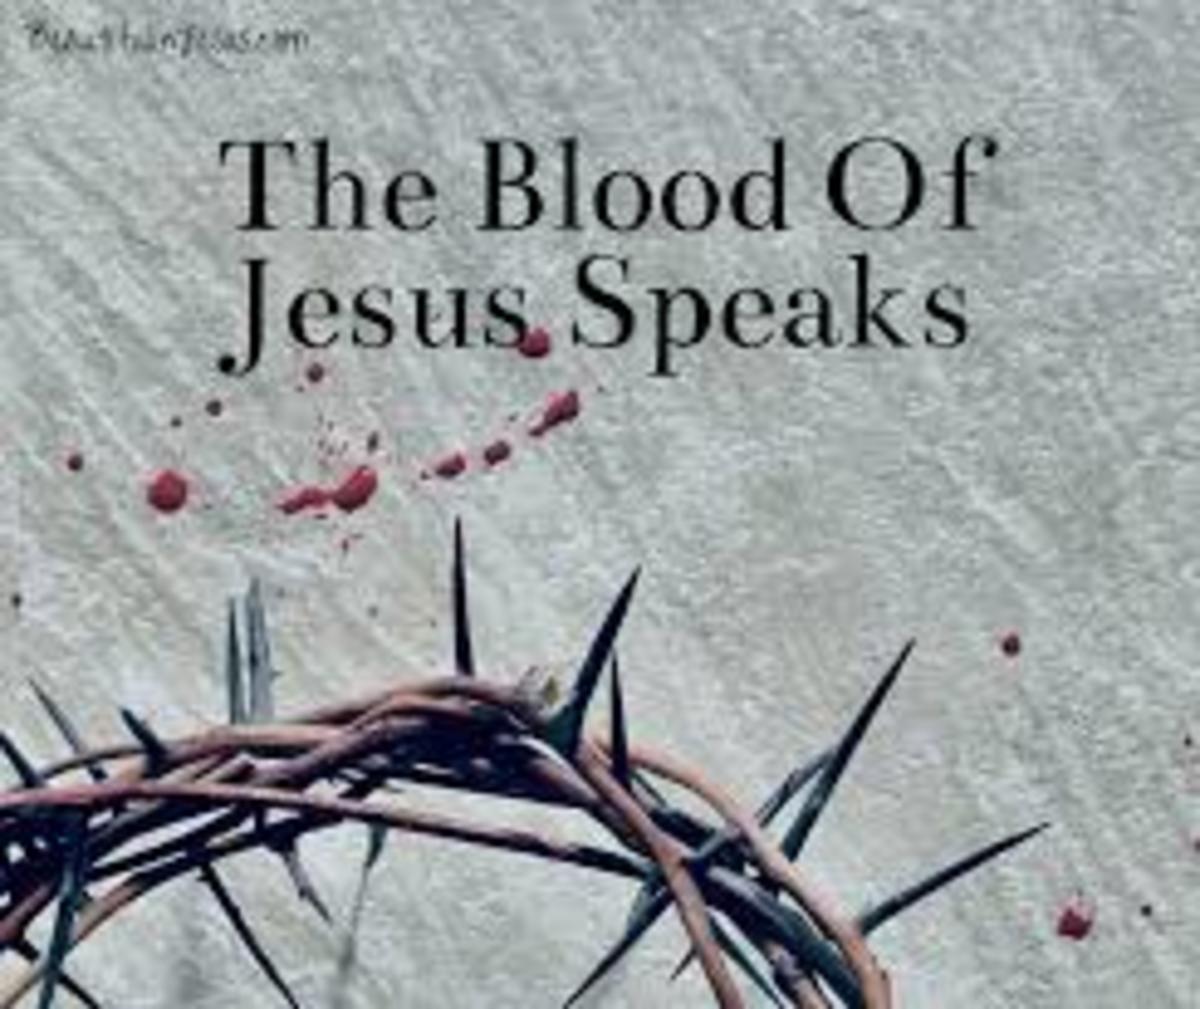 a-song-blood-of-christ-saves